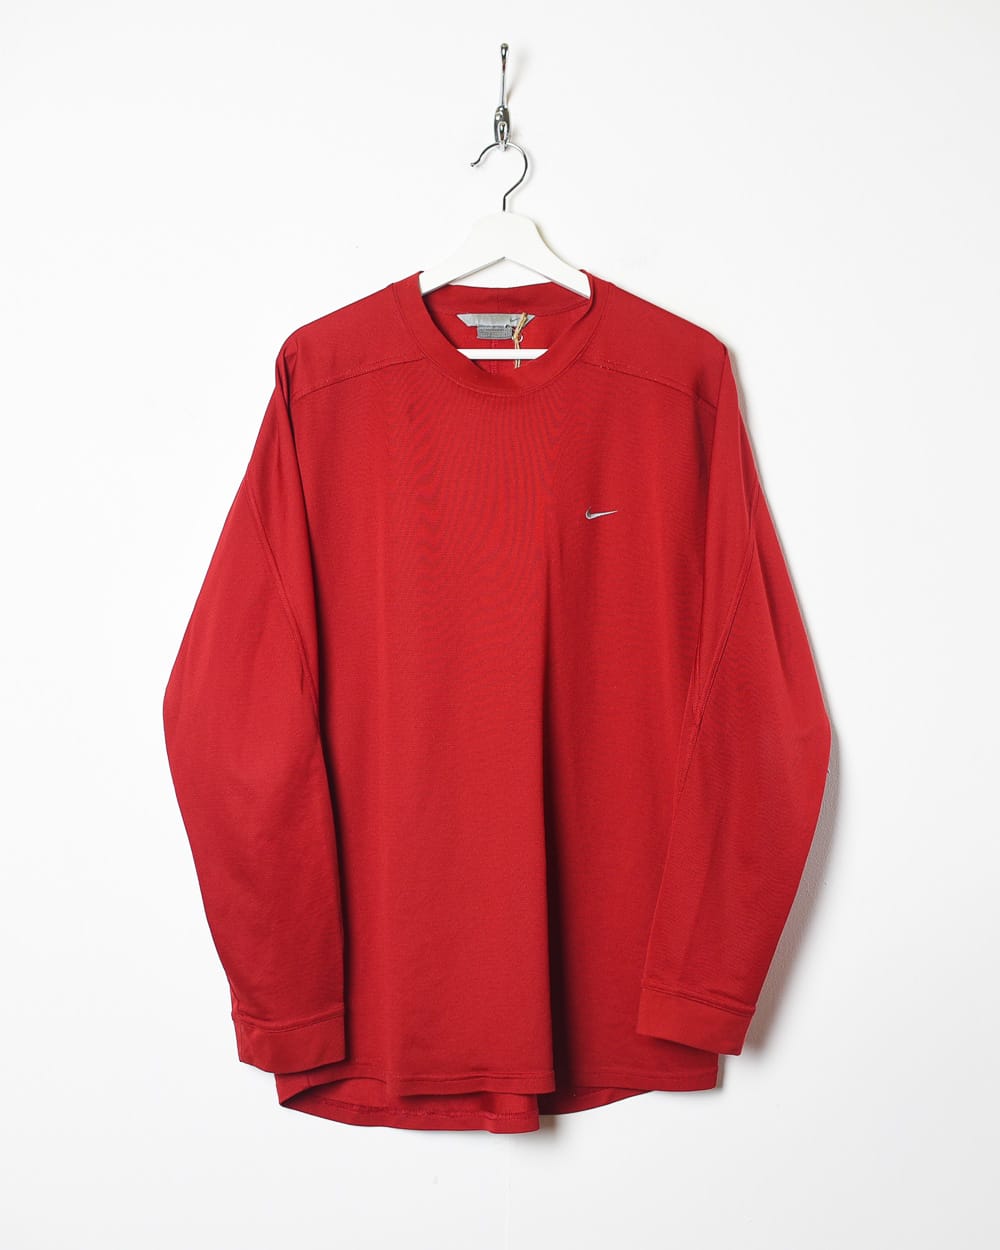 Red Nike Long Sleeved T-Shirt - X-Large